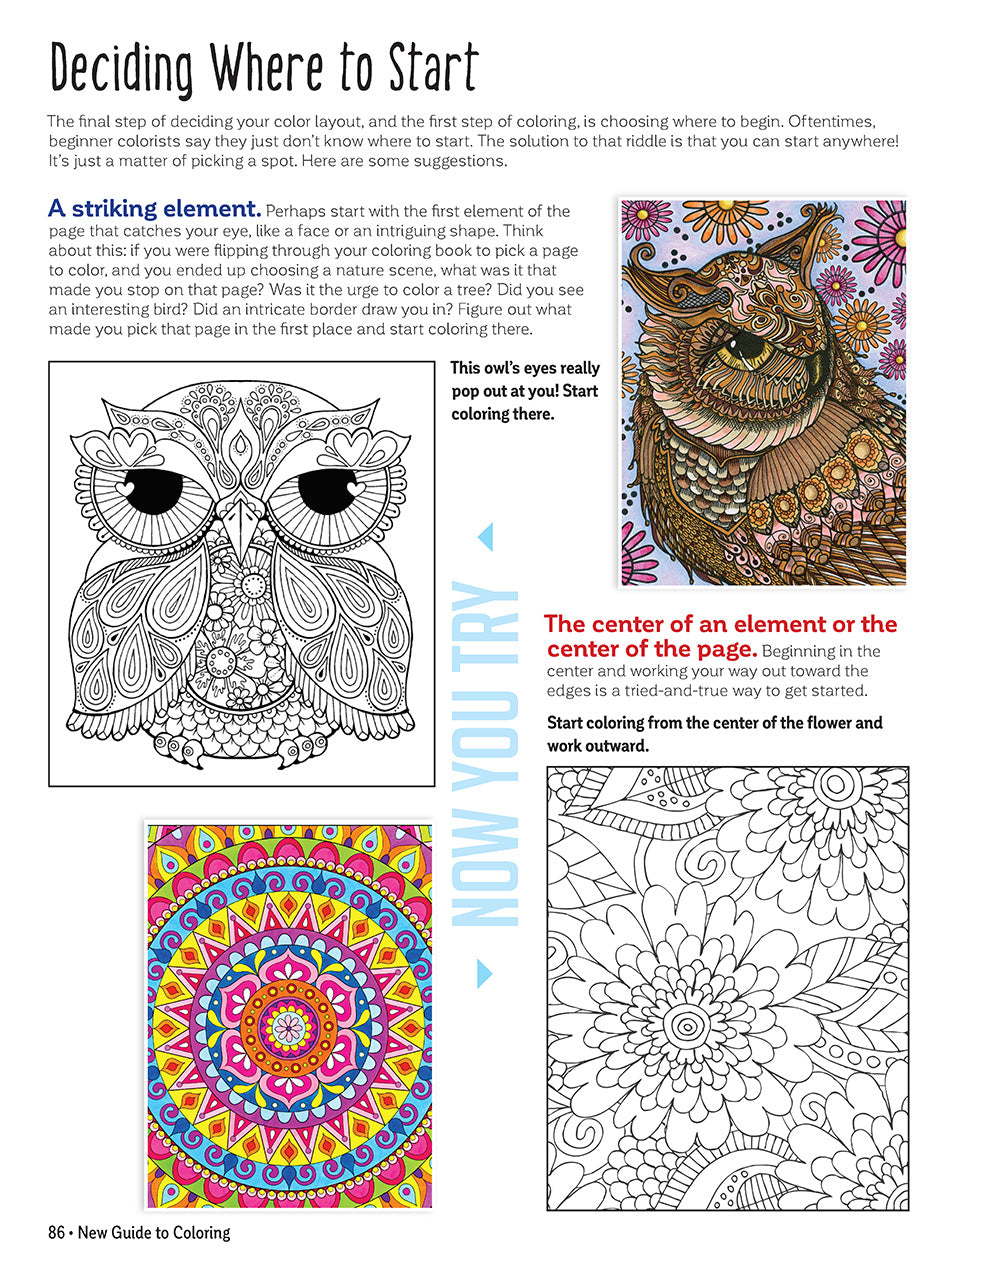 The Ultimate Guide to Adult Coloring